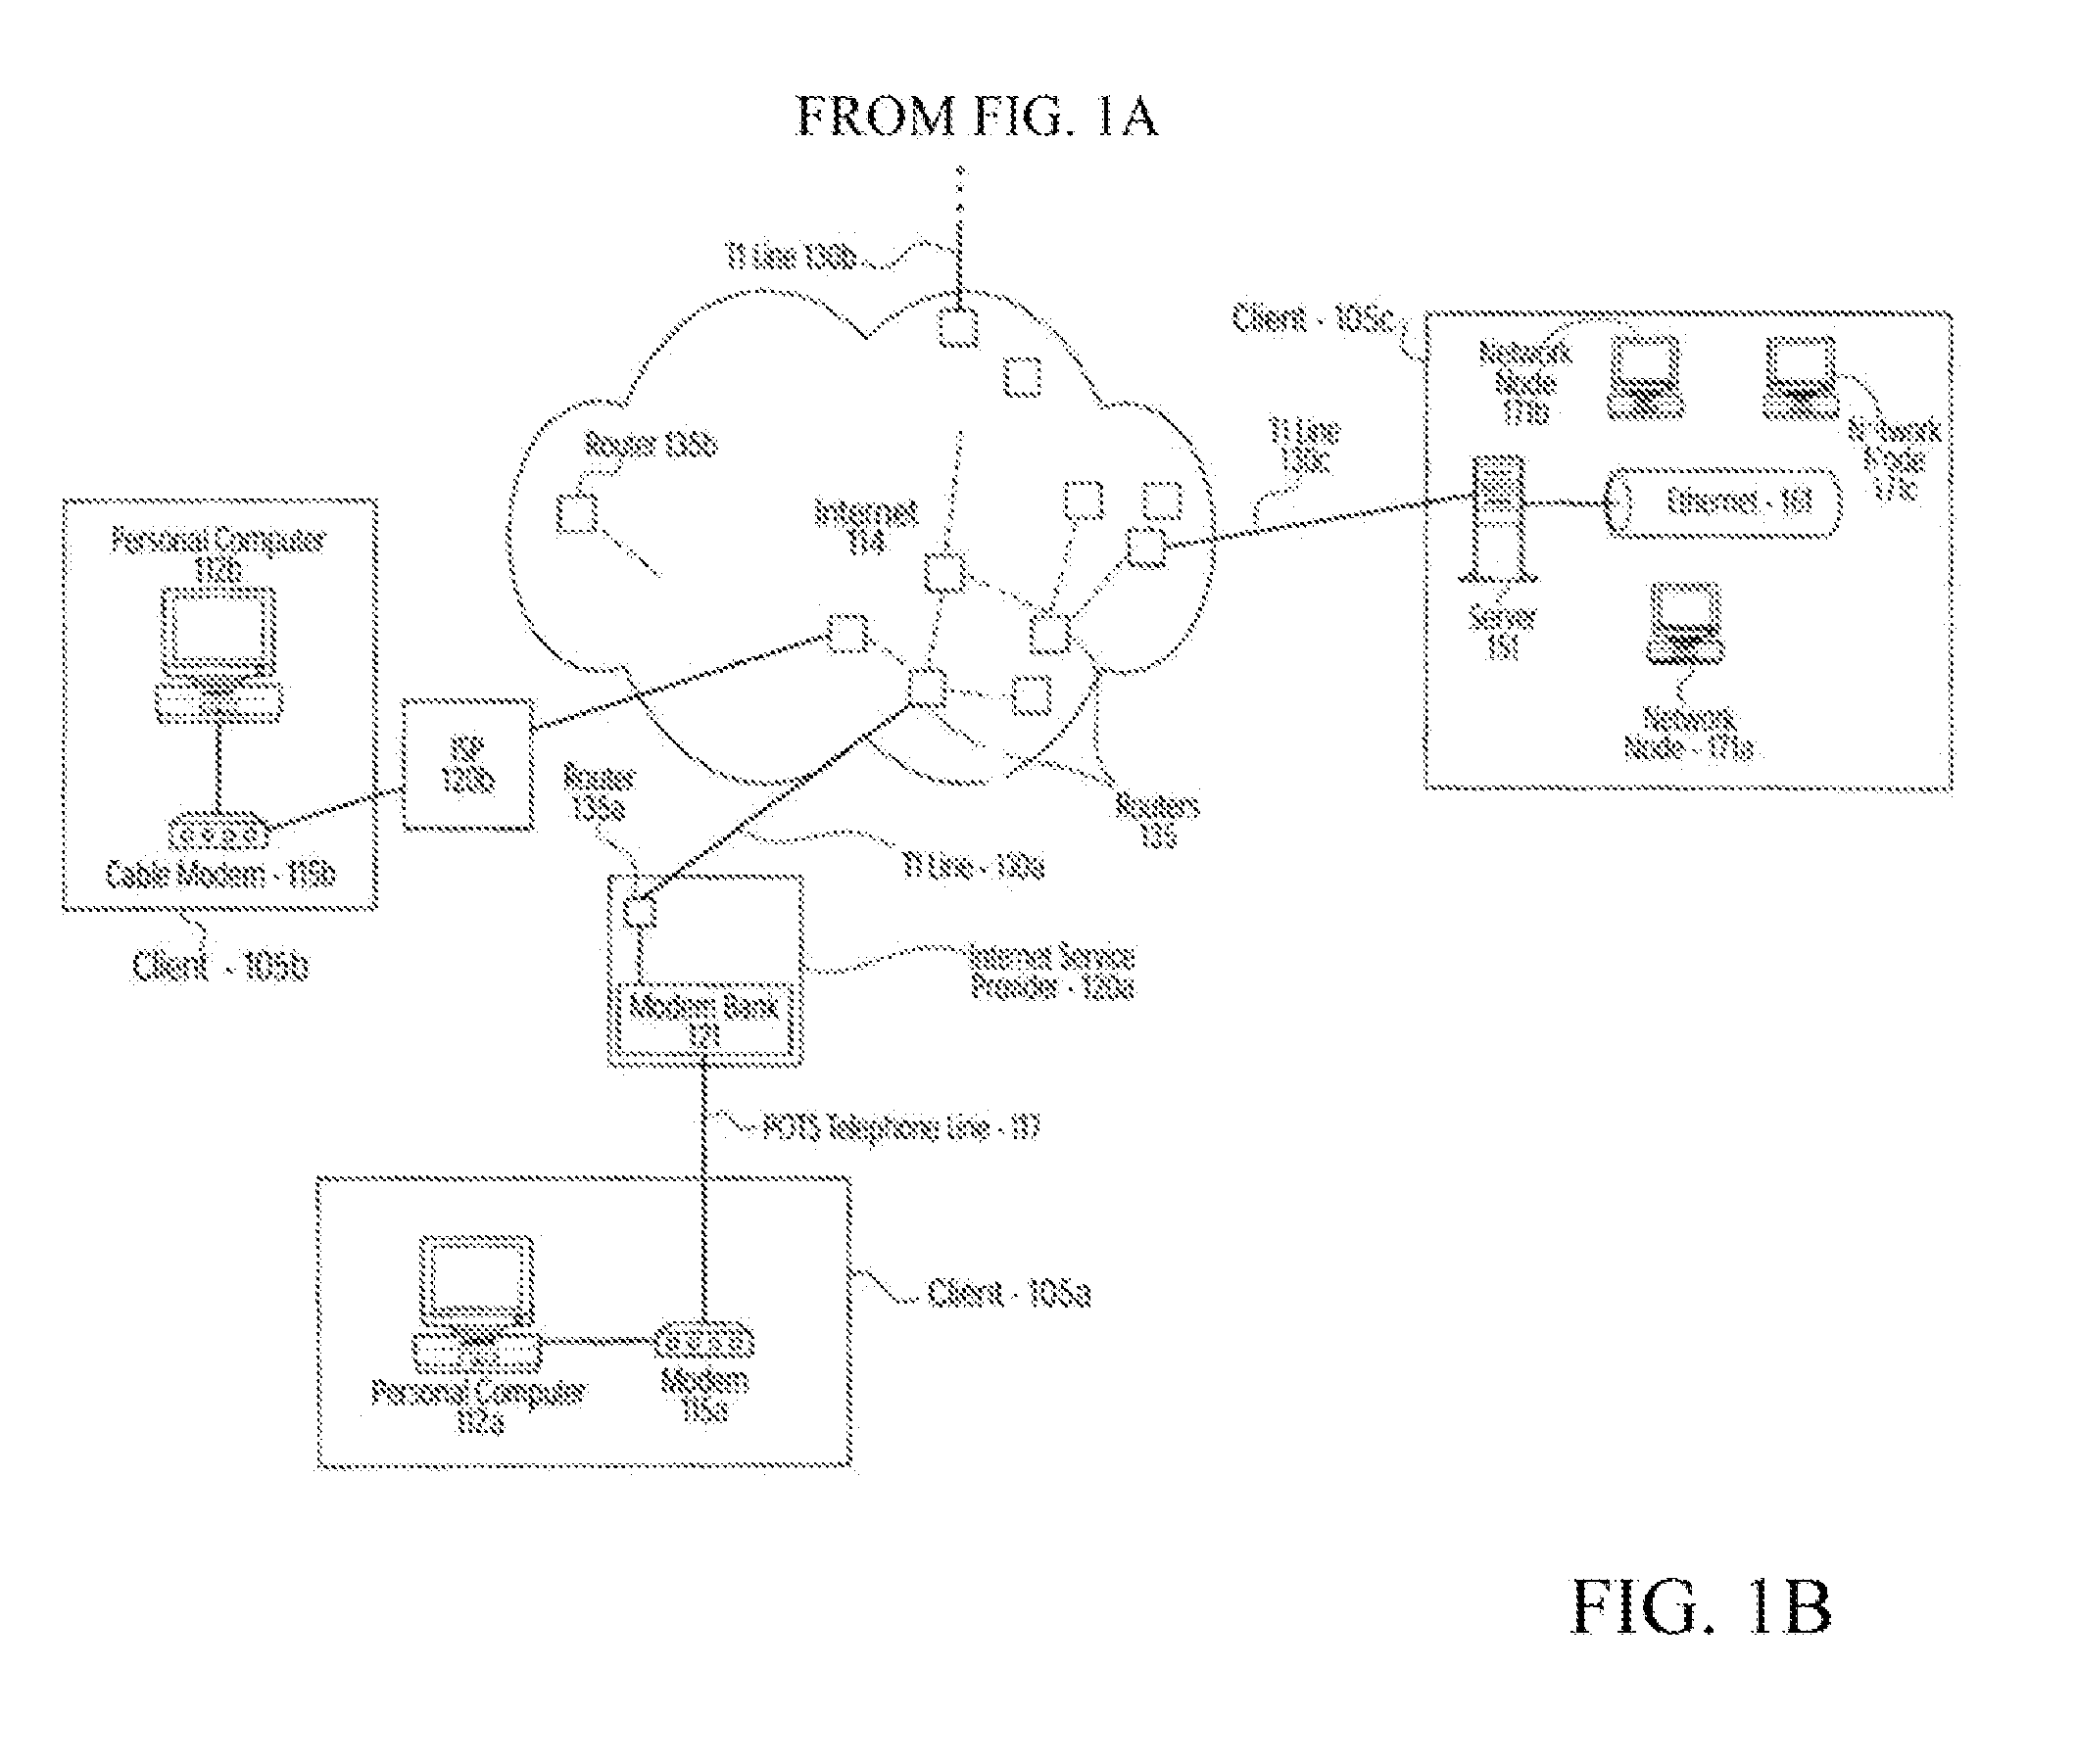 Method and system for analysis, display and dissemination of financial information using resampled statistical methods